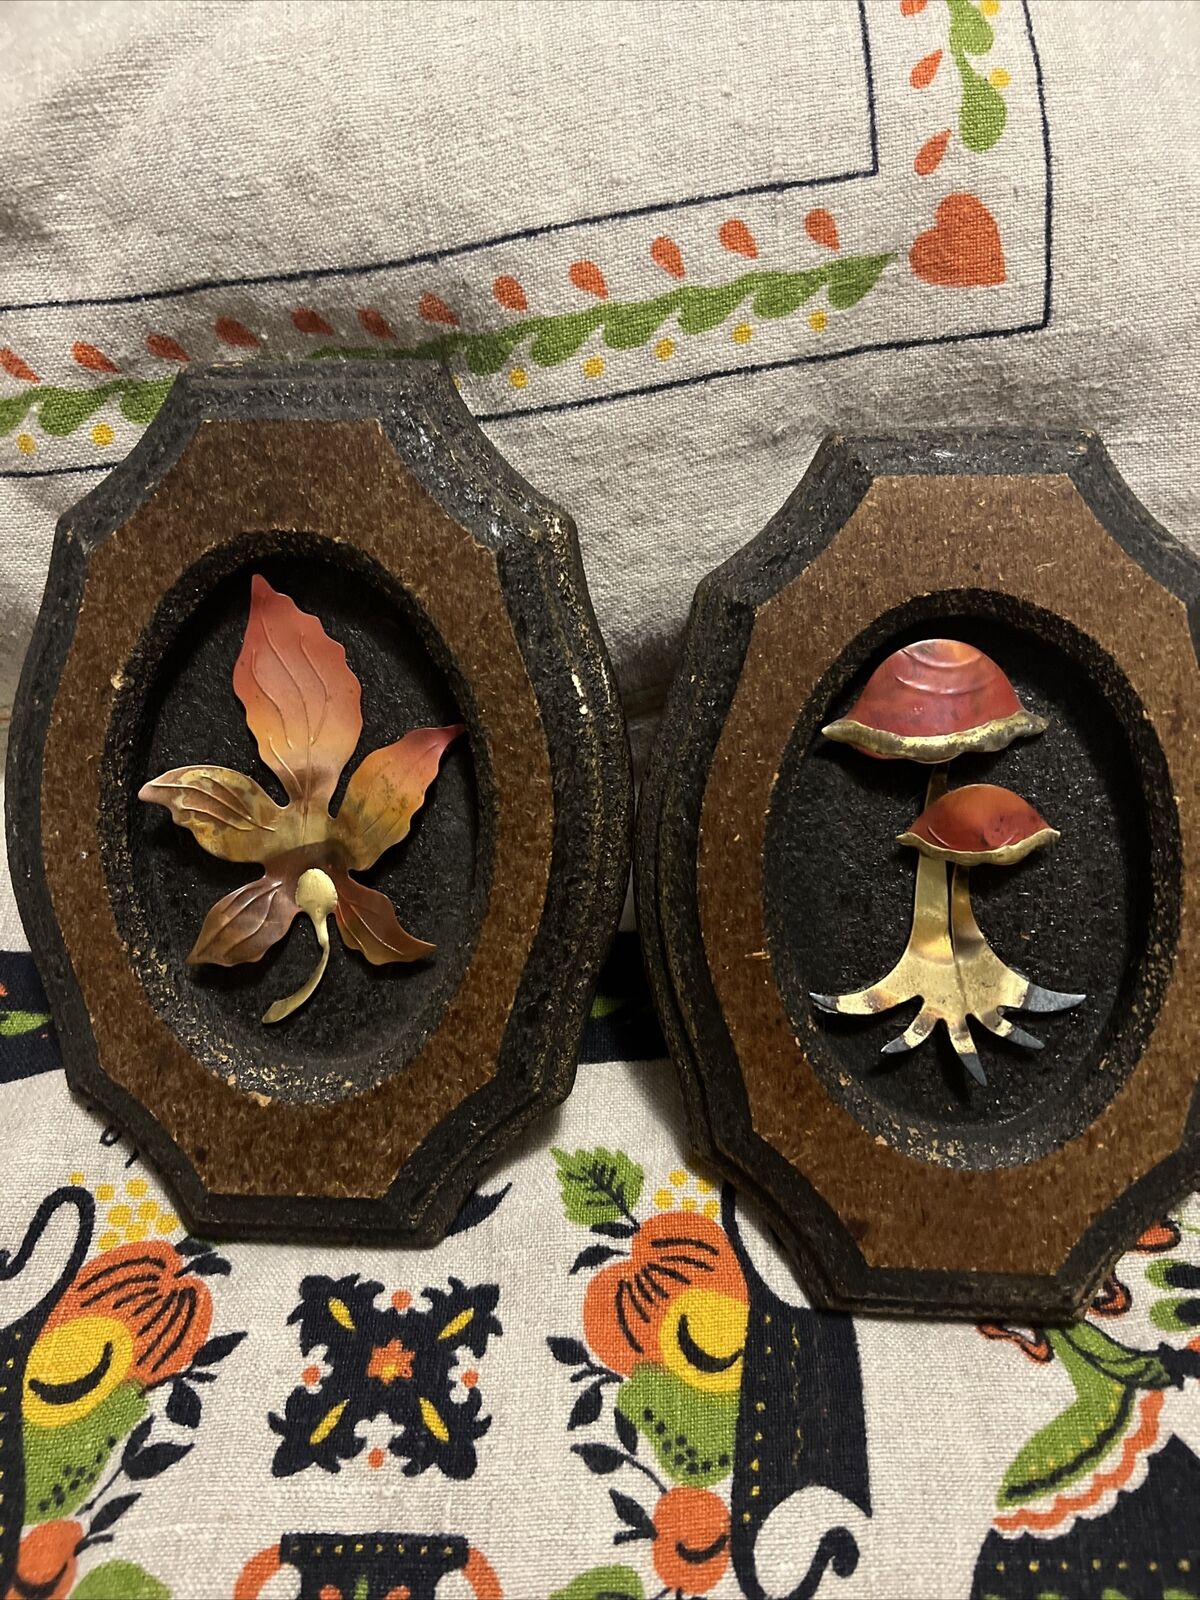 Antique Valuations: Vintage Wall Hangings Art Plaques Mushroom and Leaf Brass Wood